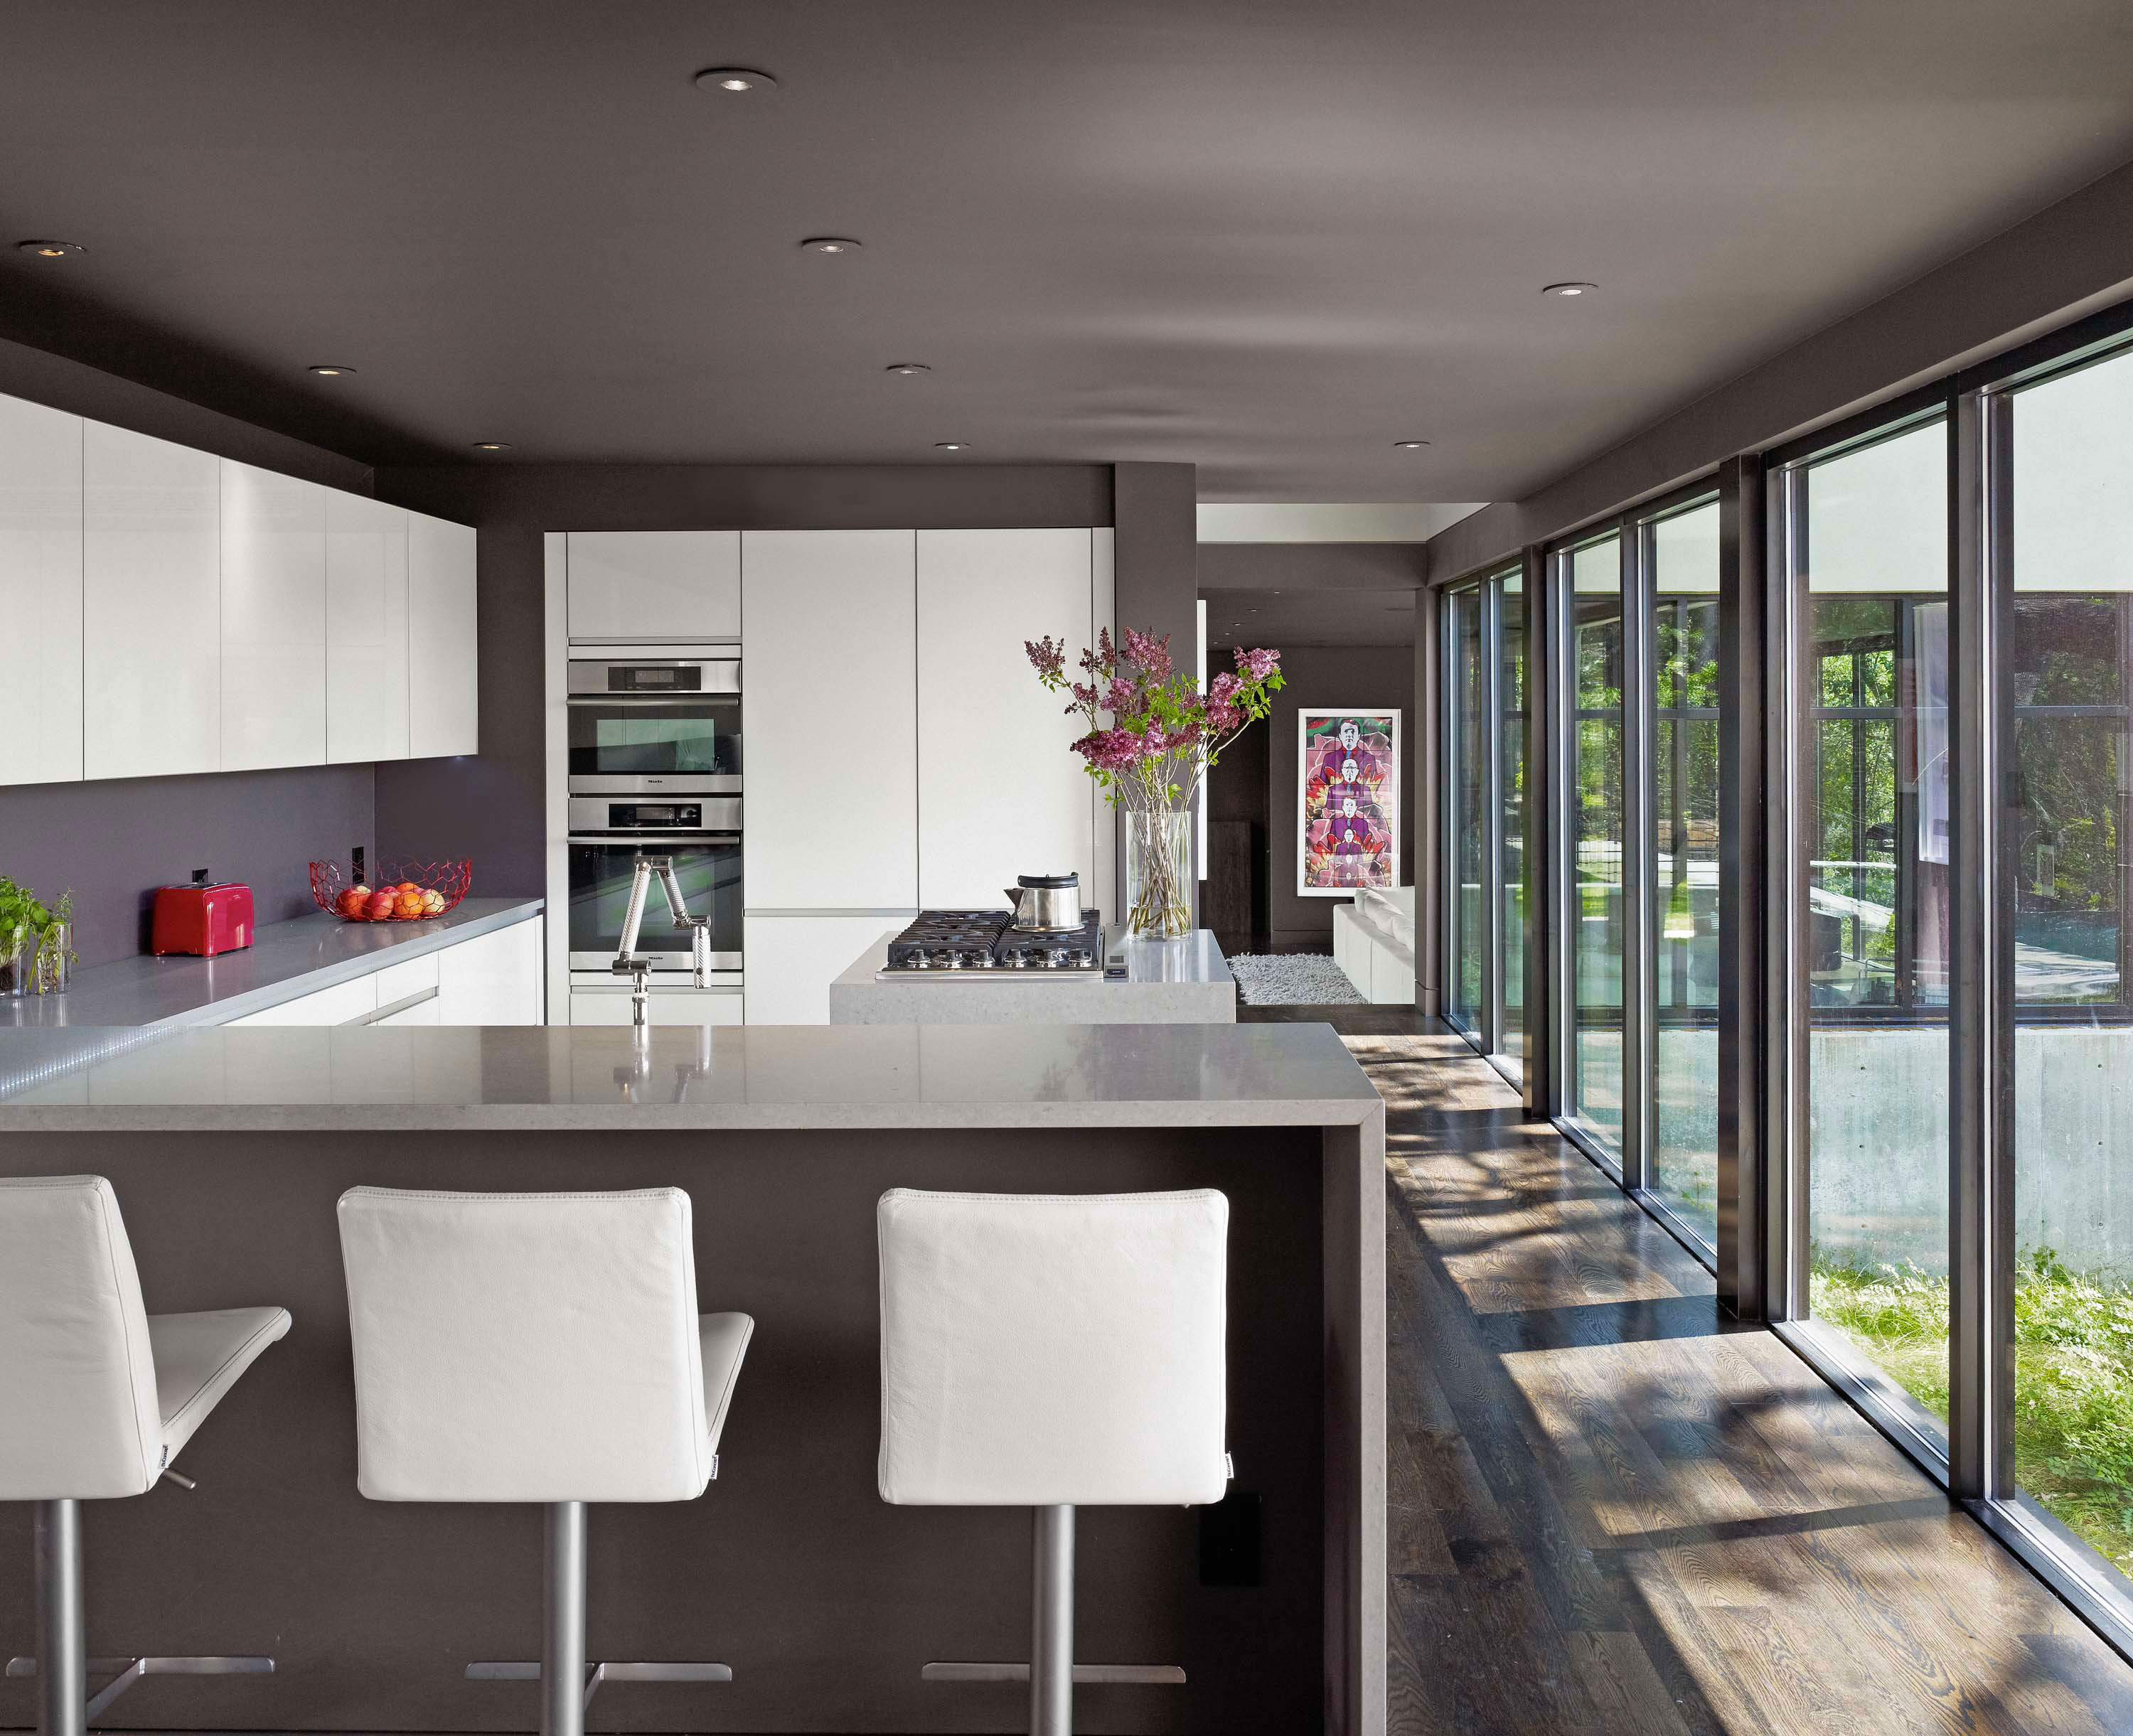 Kitchen of West Lake Hills Residence by Specht Novak Architects overlooking the outdoors. Shot by Casey Dunn.